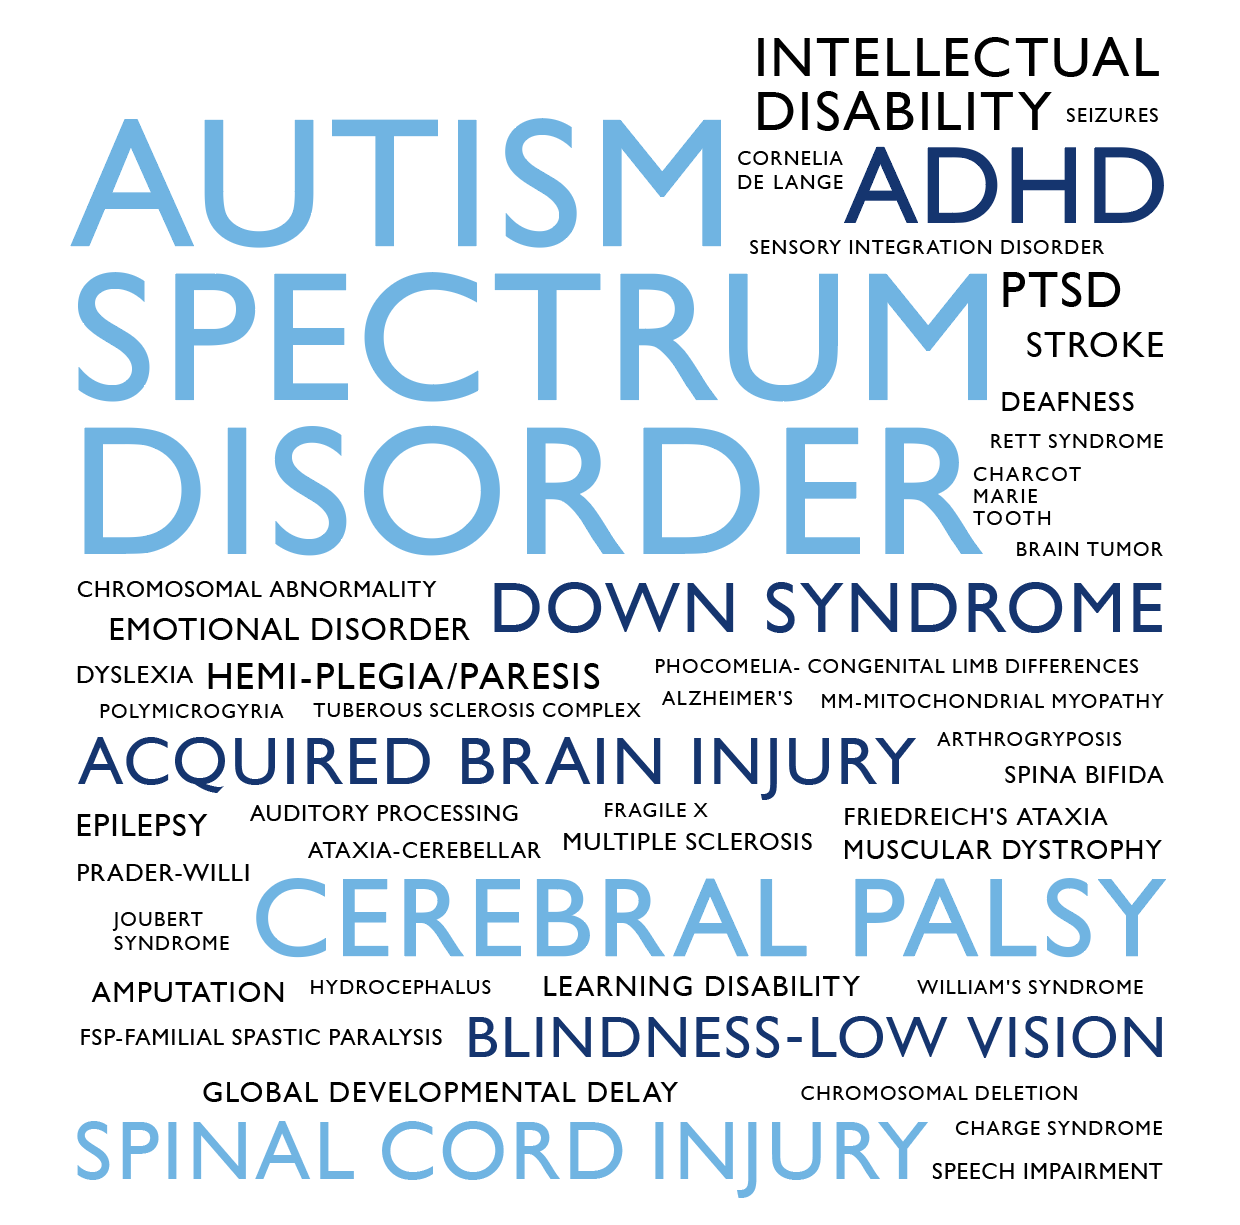 Autism Spectrum Disorder, Intellectual Disability, Seizures, Cornelia de Lange, ADHD, Sensory Integration Disorder, PTSD, Stroke, Deafness, Rett Syndrome, Charcot Marie Tooth, Brain Tumor, Chromosomal Abnormality, Emotional Disorder, Down Syndrome, Dyslexia, Hemi-Plegia/Paresis, Polymicrogyria, Tuberous Sclerosis Complex, Phocomelia-Congenital Limb Differences, Alzheimer’s, MM-Mitochondrial Myopathy, Acquired Brain Injury, Arthrogryposis, Spina Bifida, Epilepsy, Auditory Processing, Fragile X, Friedreich’s Ataxia, Prader-Willi, Ataxia-Cerebellar, Multiple Schlerosis, Muscular Dystrophy, Joubert Syndrome, Cerebral Palsy, Amputation, Hydrocephalus, Learning Disability, William’s Syndrome, FSP-Familial Spastic Paralysis, Blindness-Low Vision, Global Developmental Delay, Chromosomal Deletion, Charge Syndrome, Spinal Chord Injury, Speech Impairment